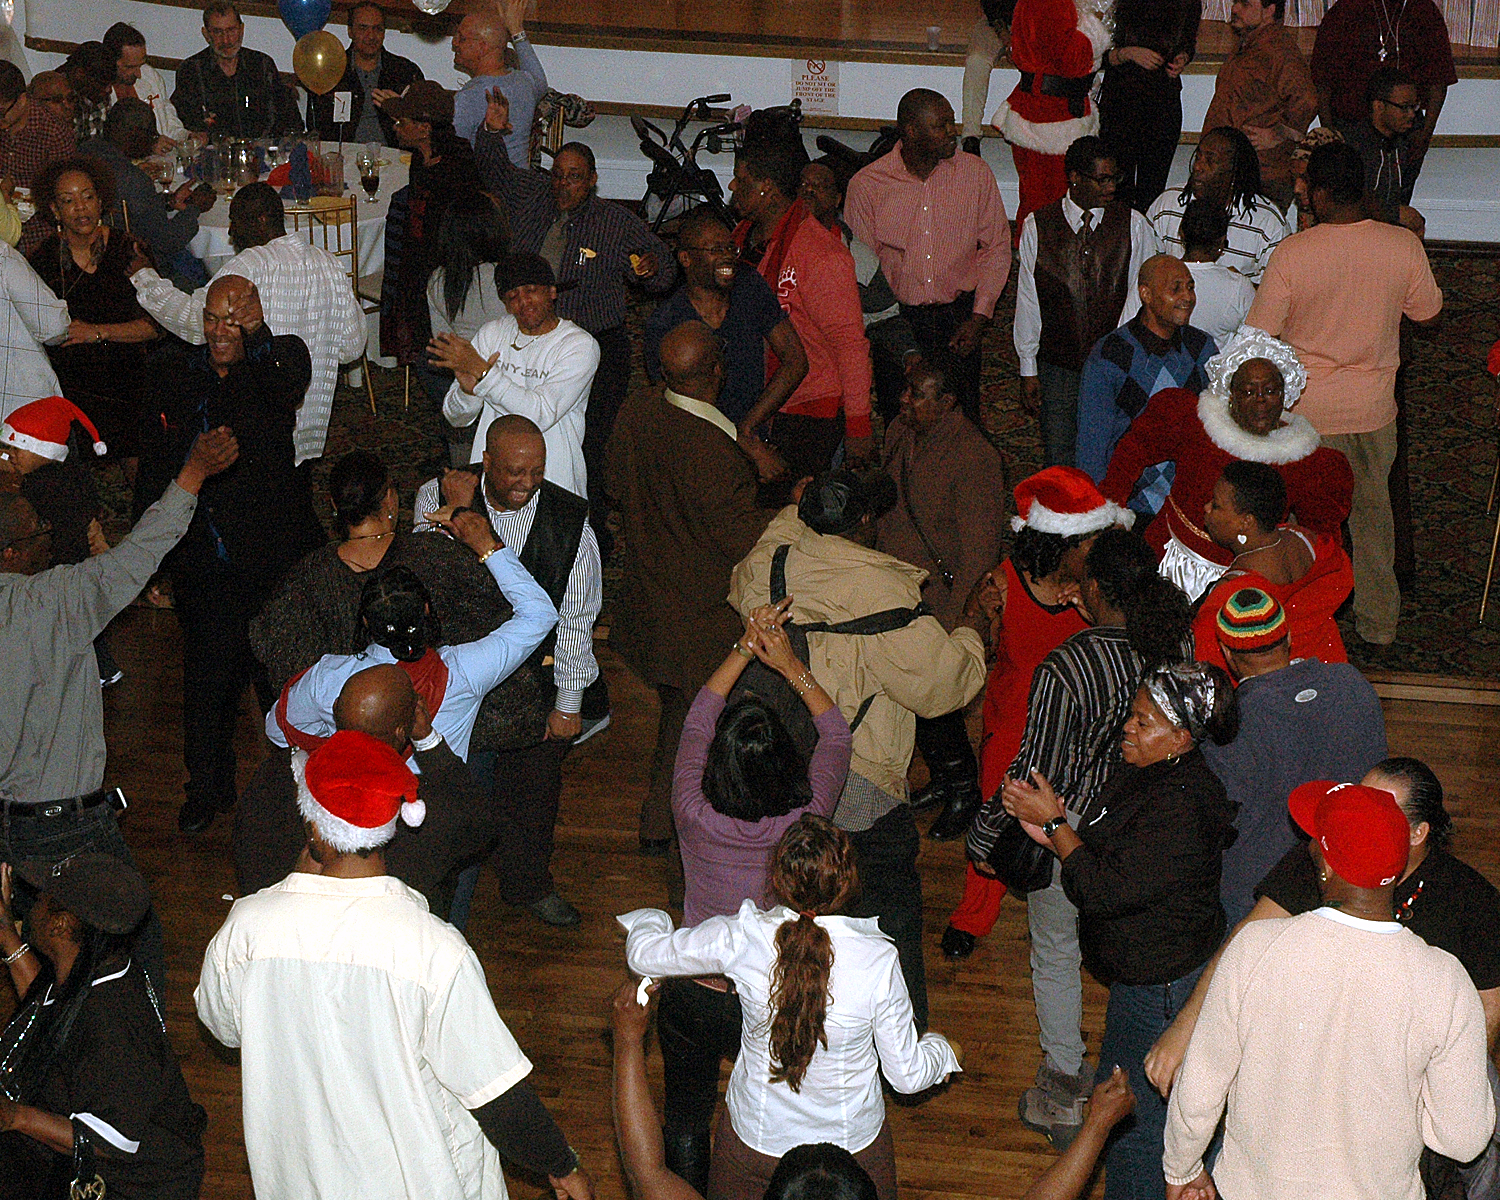 Attendees on the dance floor